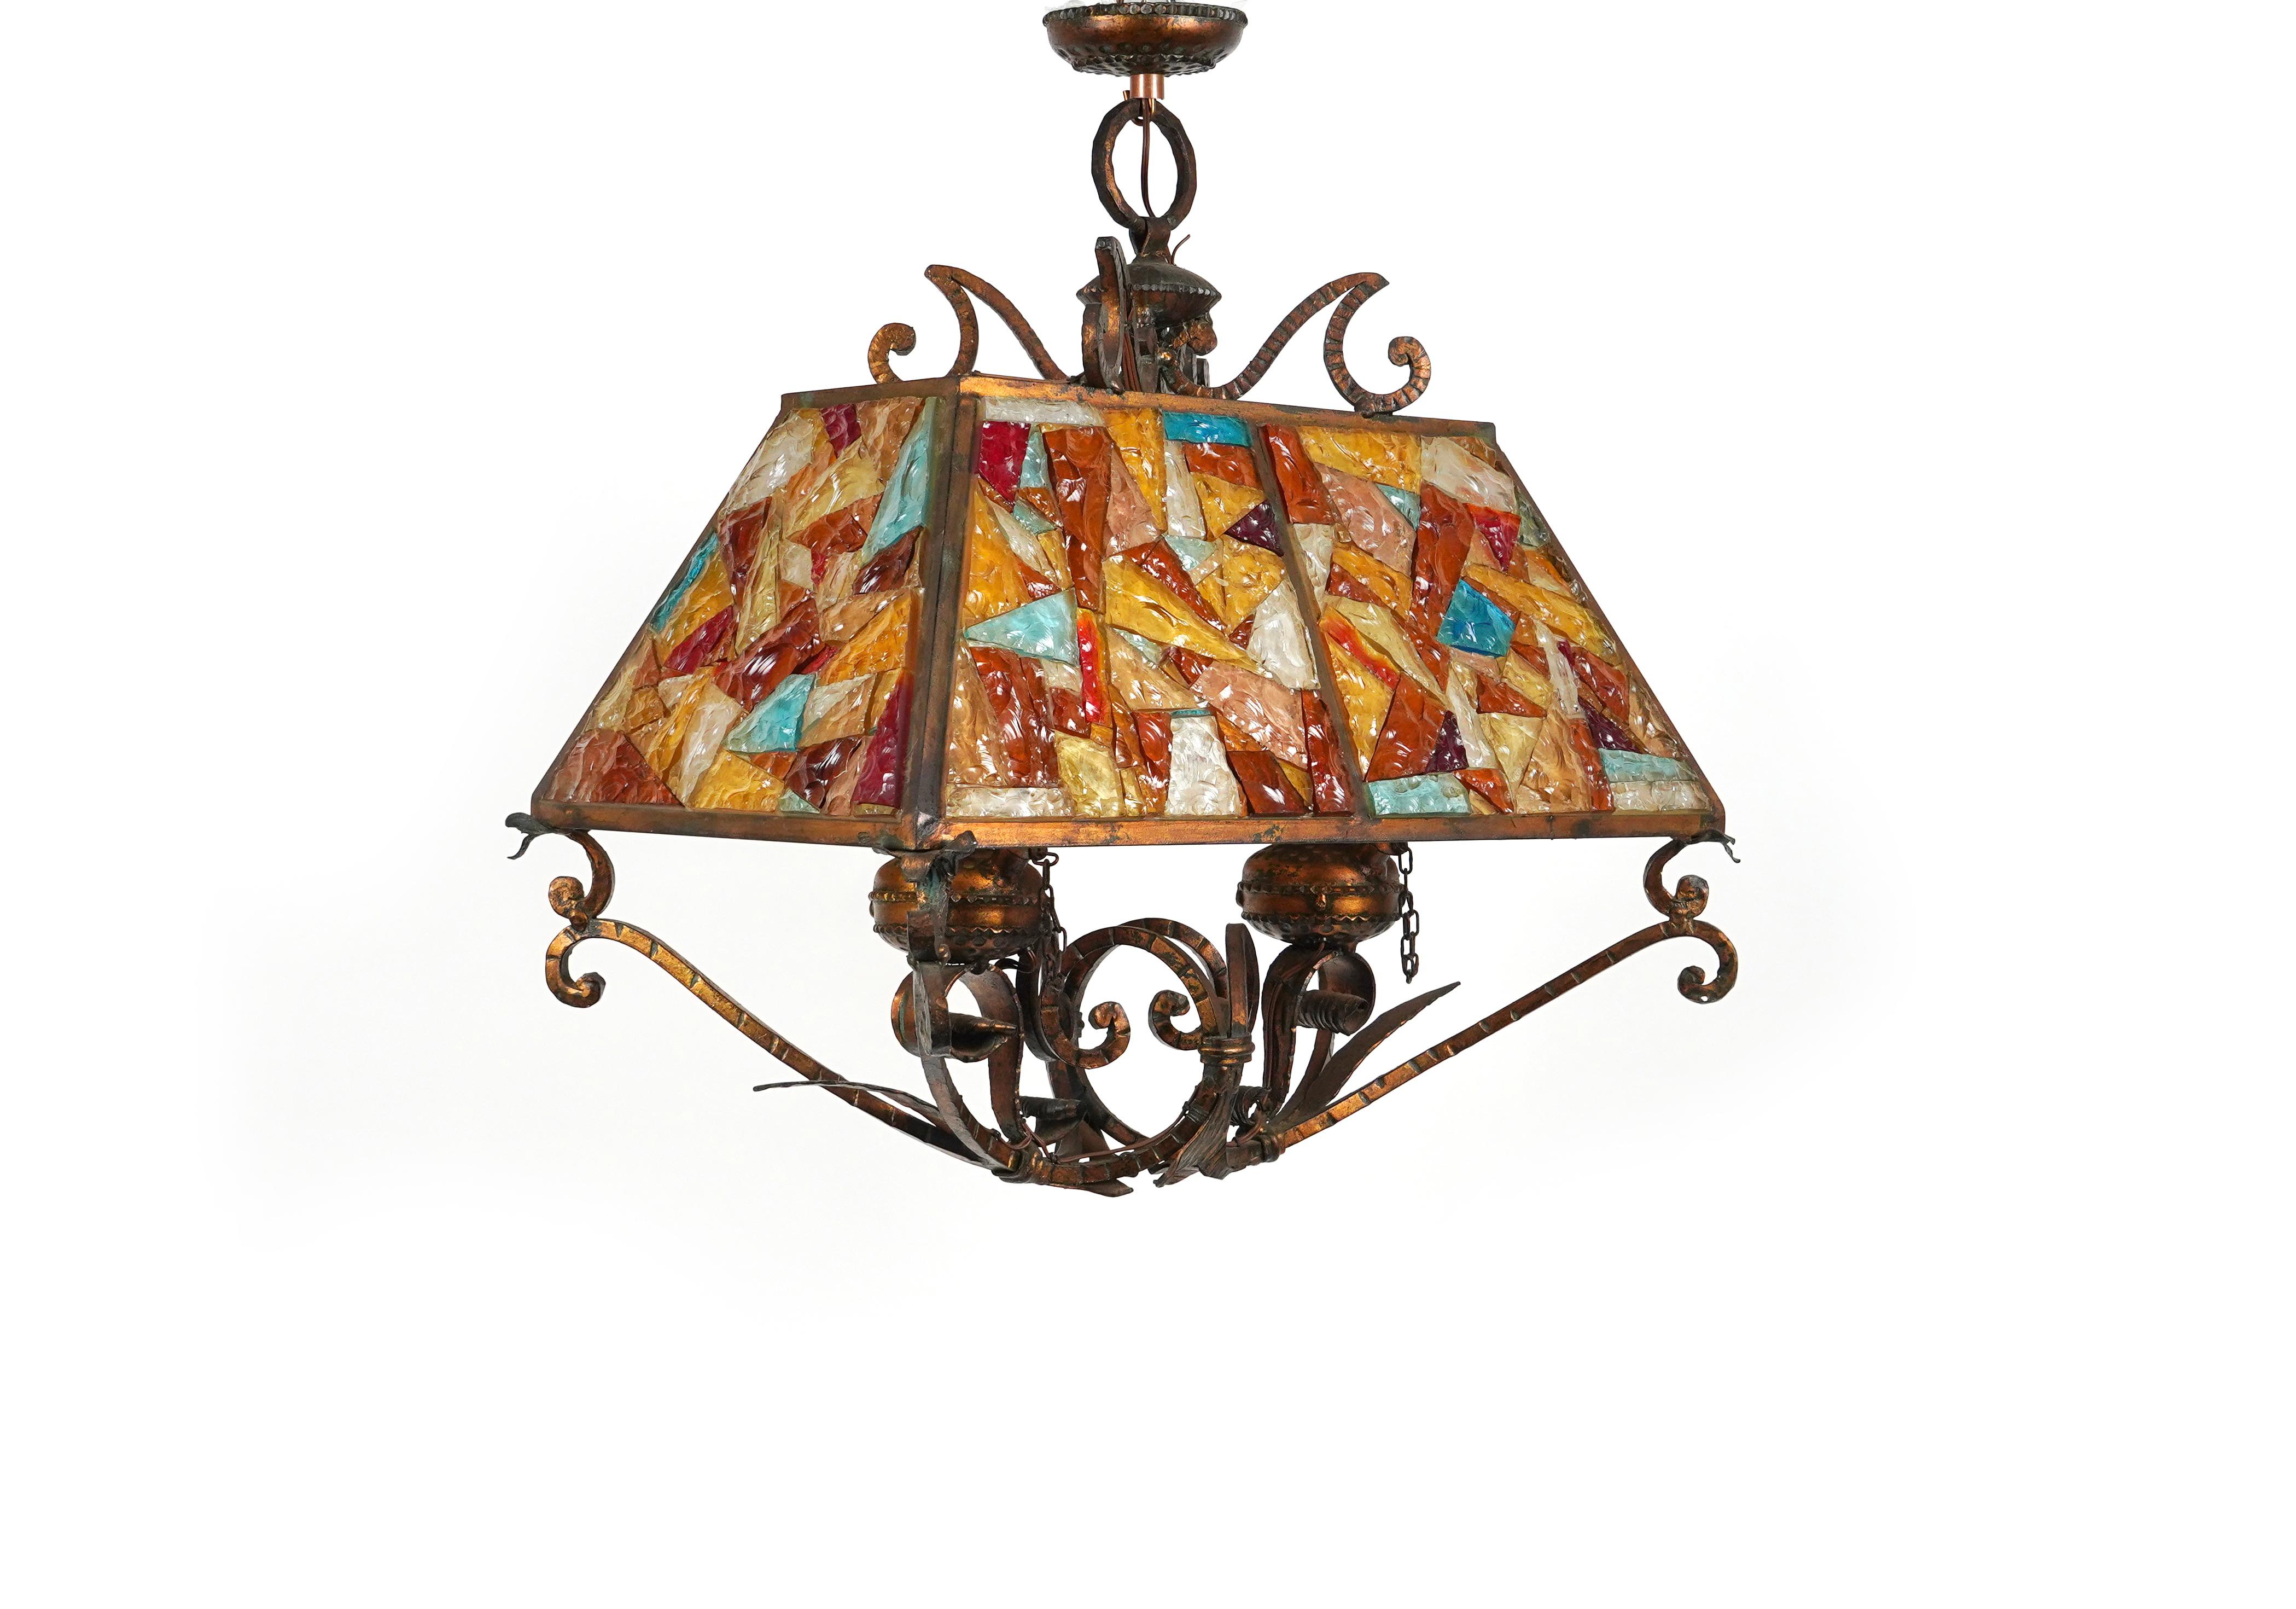 Chandelier Lantern Wrought Iron and Hammered Glass by Longobard, Italy, 1970s For Sale 2